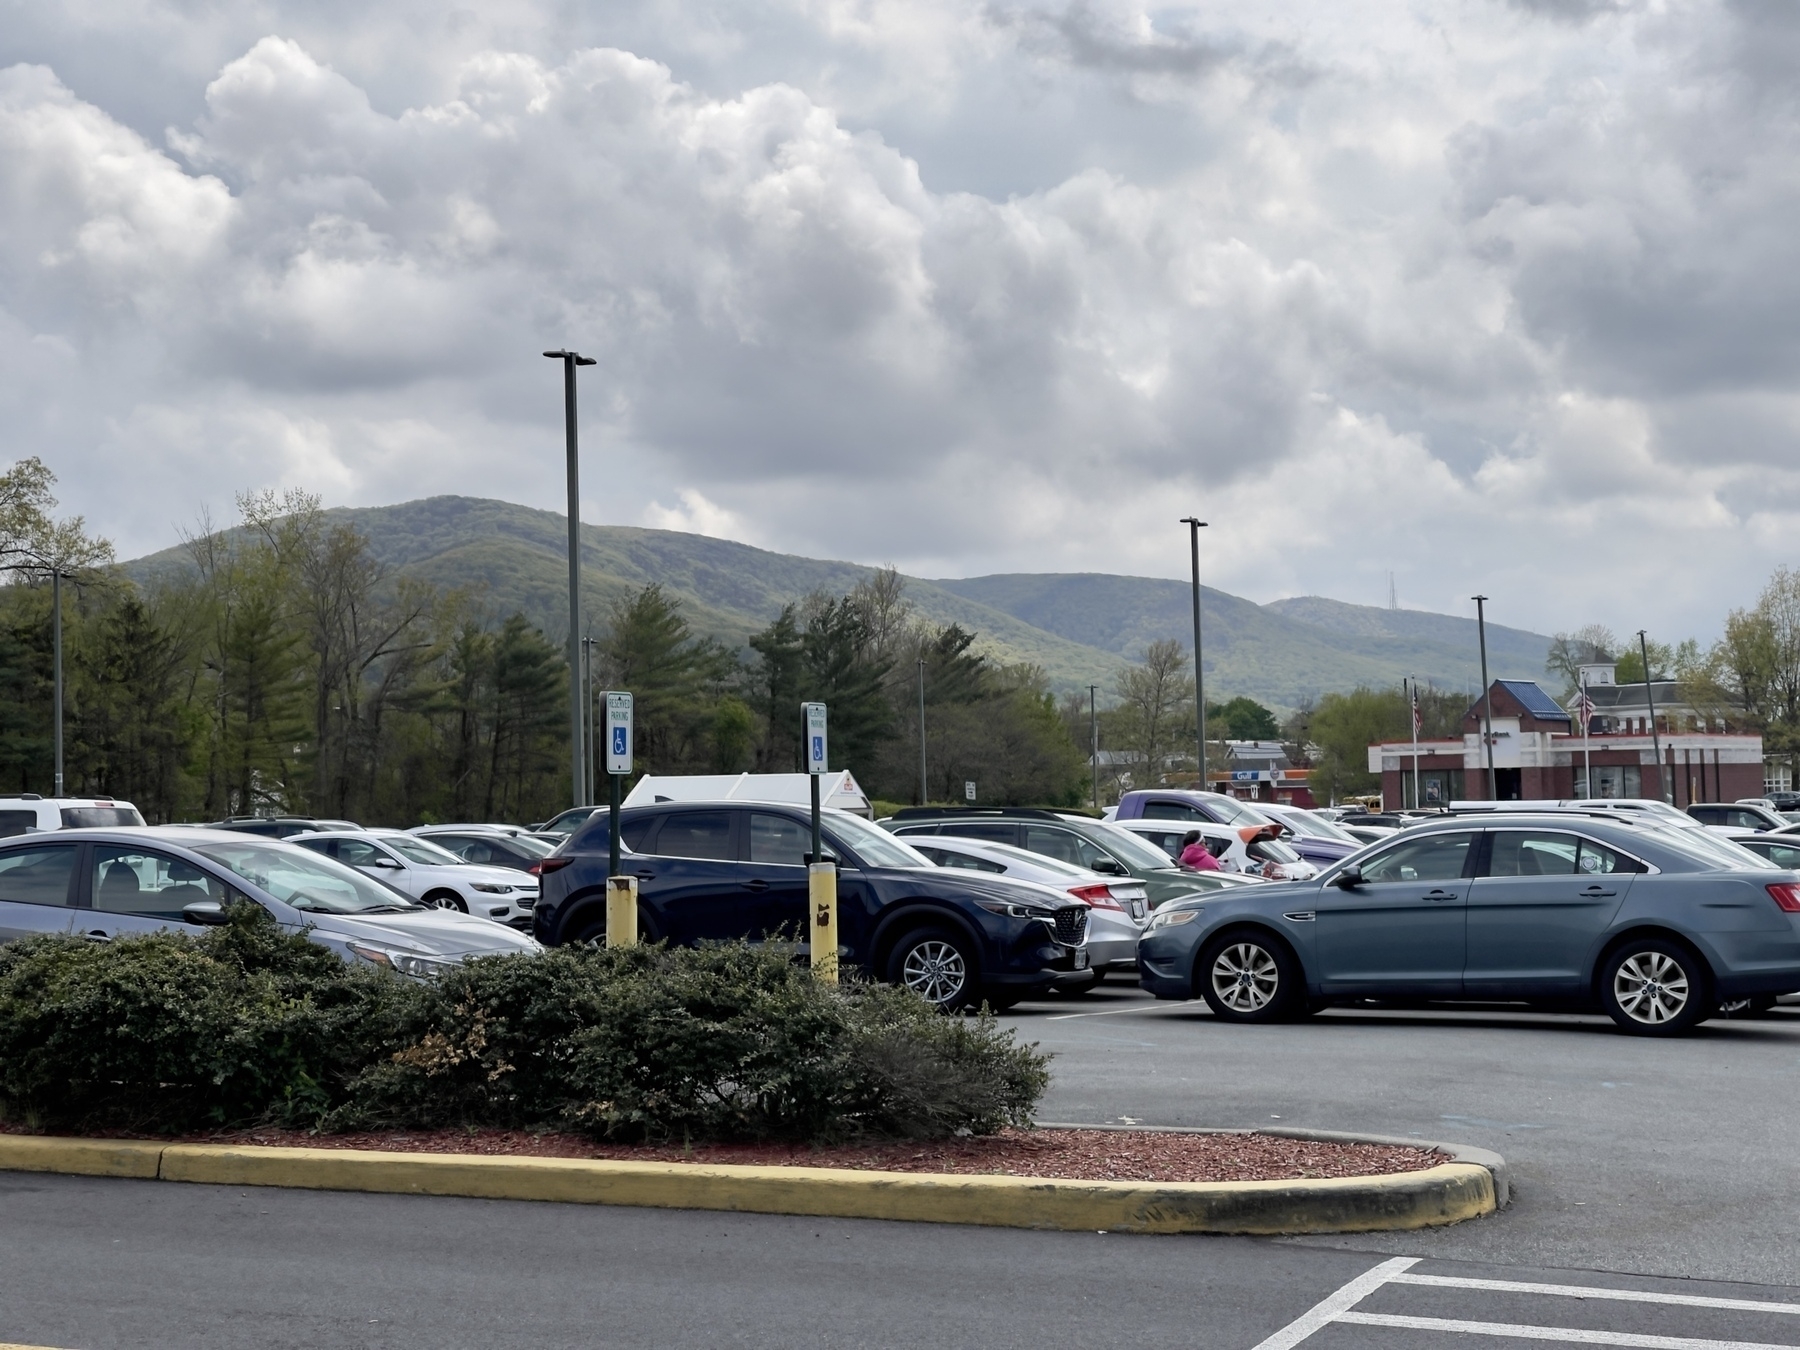 Chain of rounded mountains with parking lot in foreground. Color.